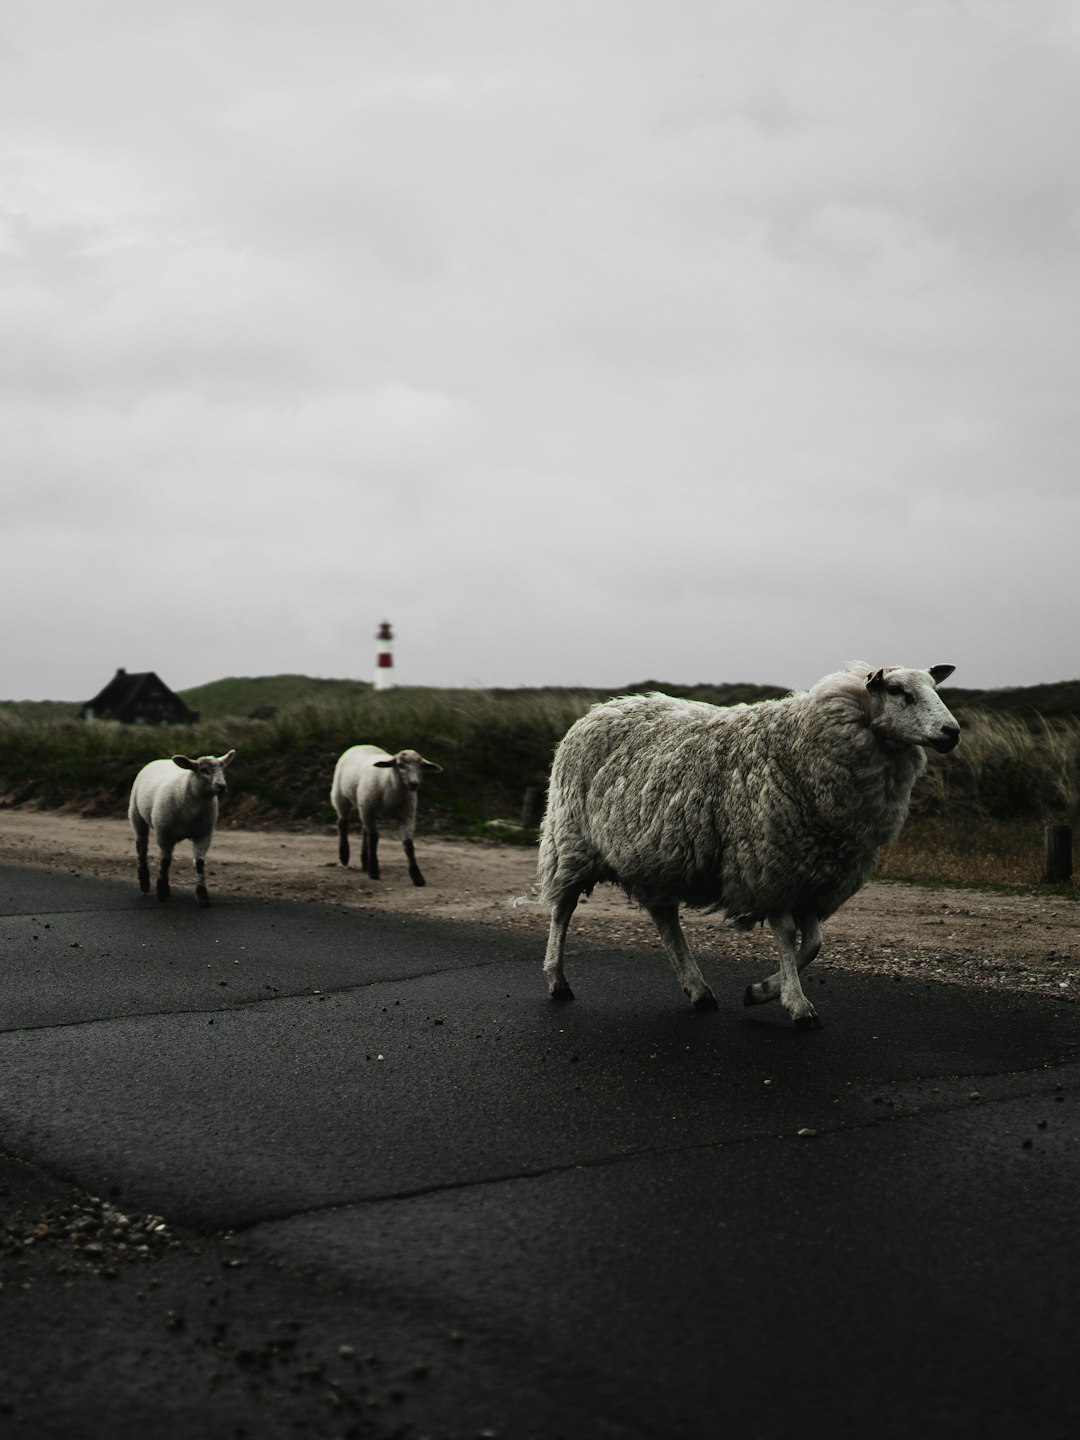 A photograph of three sheep walking along the road on Sylt island in Germany, with a grey sky and lighthouse in the background, in the style of unsplash photography. –ar 3:4